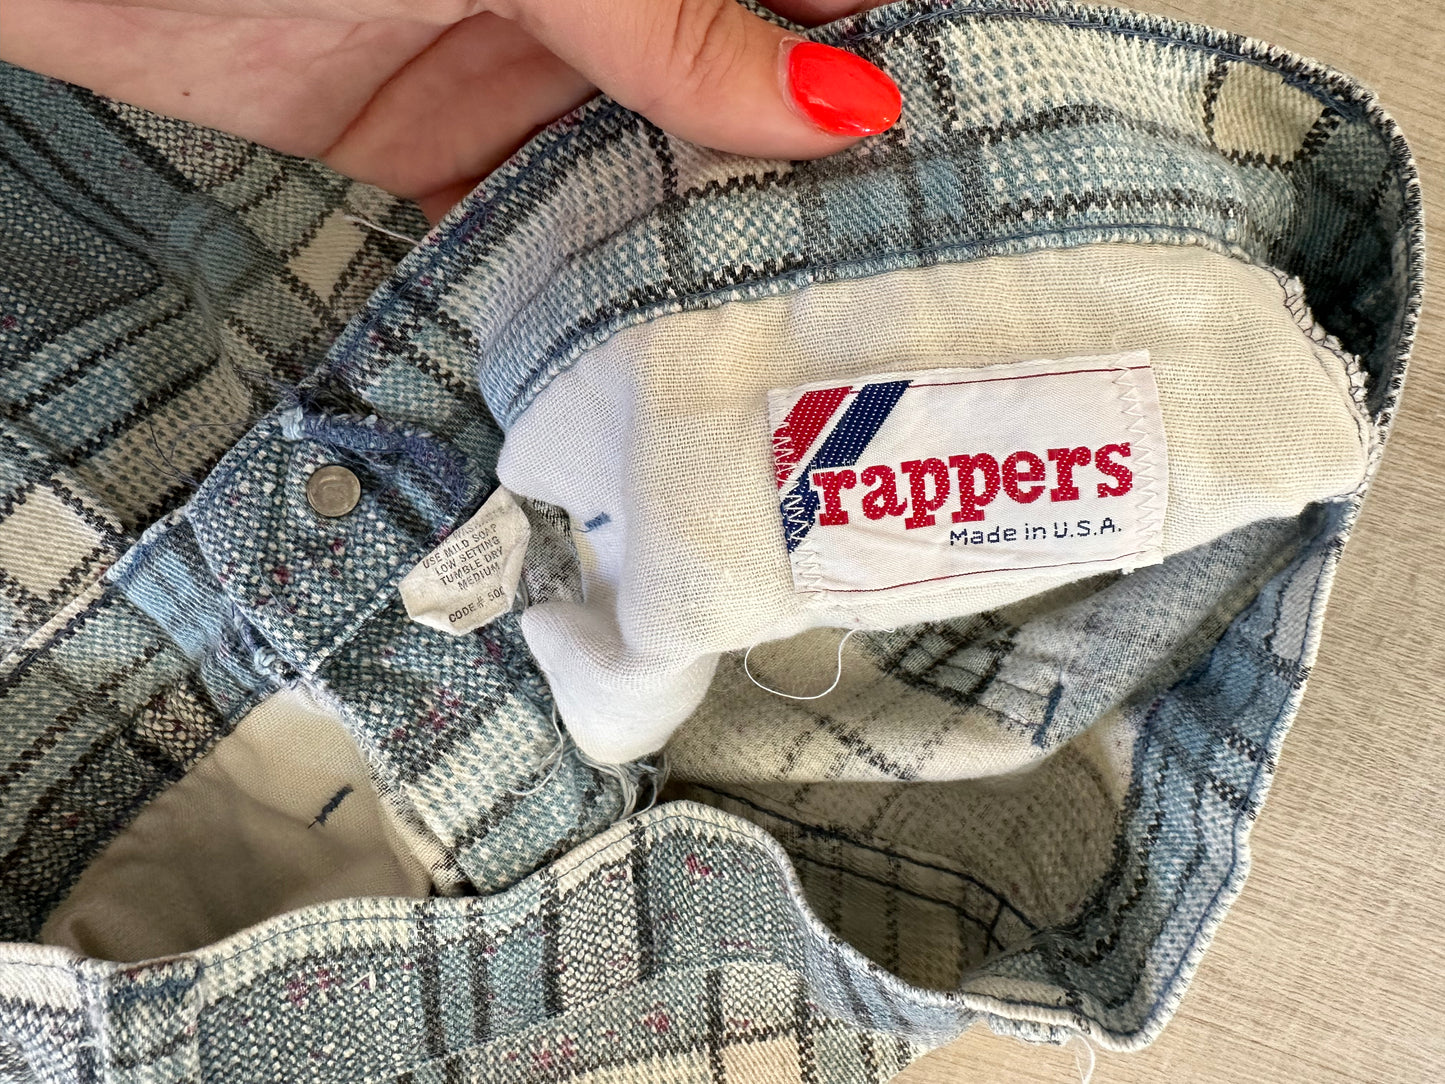 The Bernie Rappers Trousers